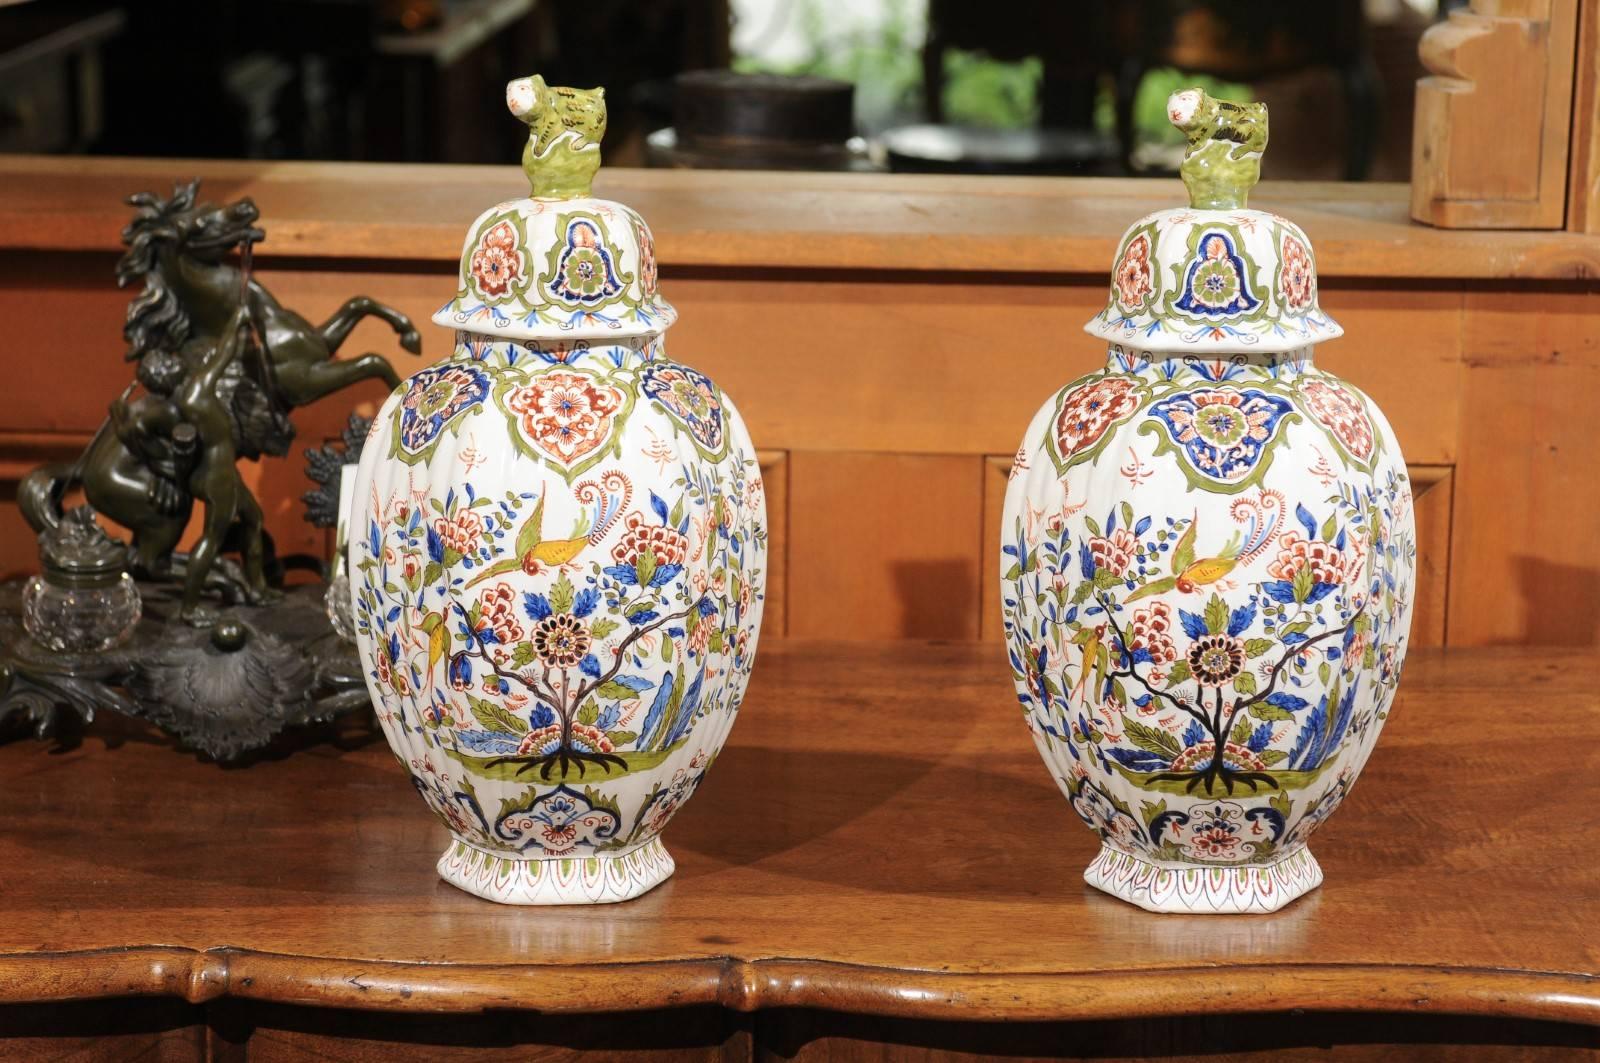 Pair of 19th Century Faience Jars with Lids from Devres, France In Good Condition For Sale In Atlanta, GA